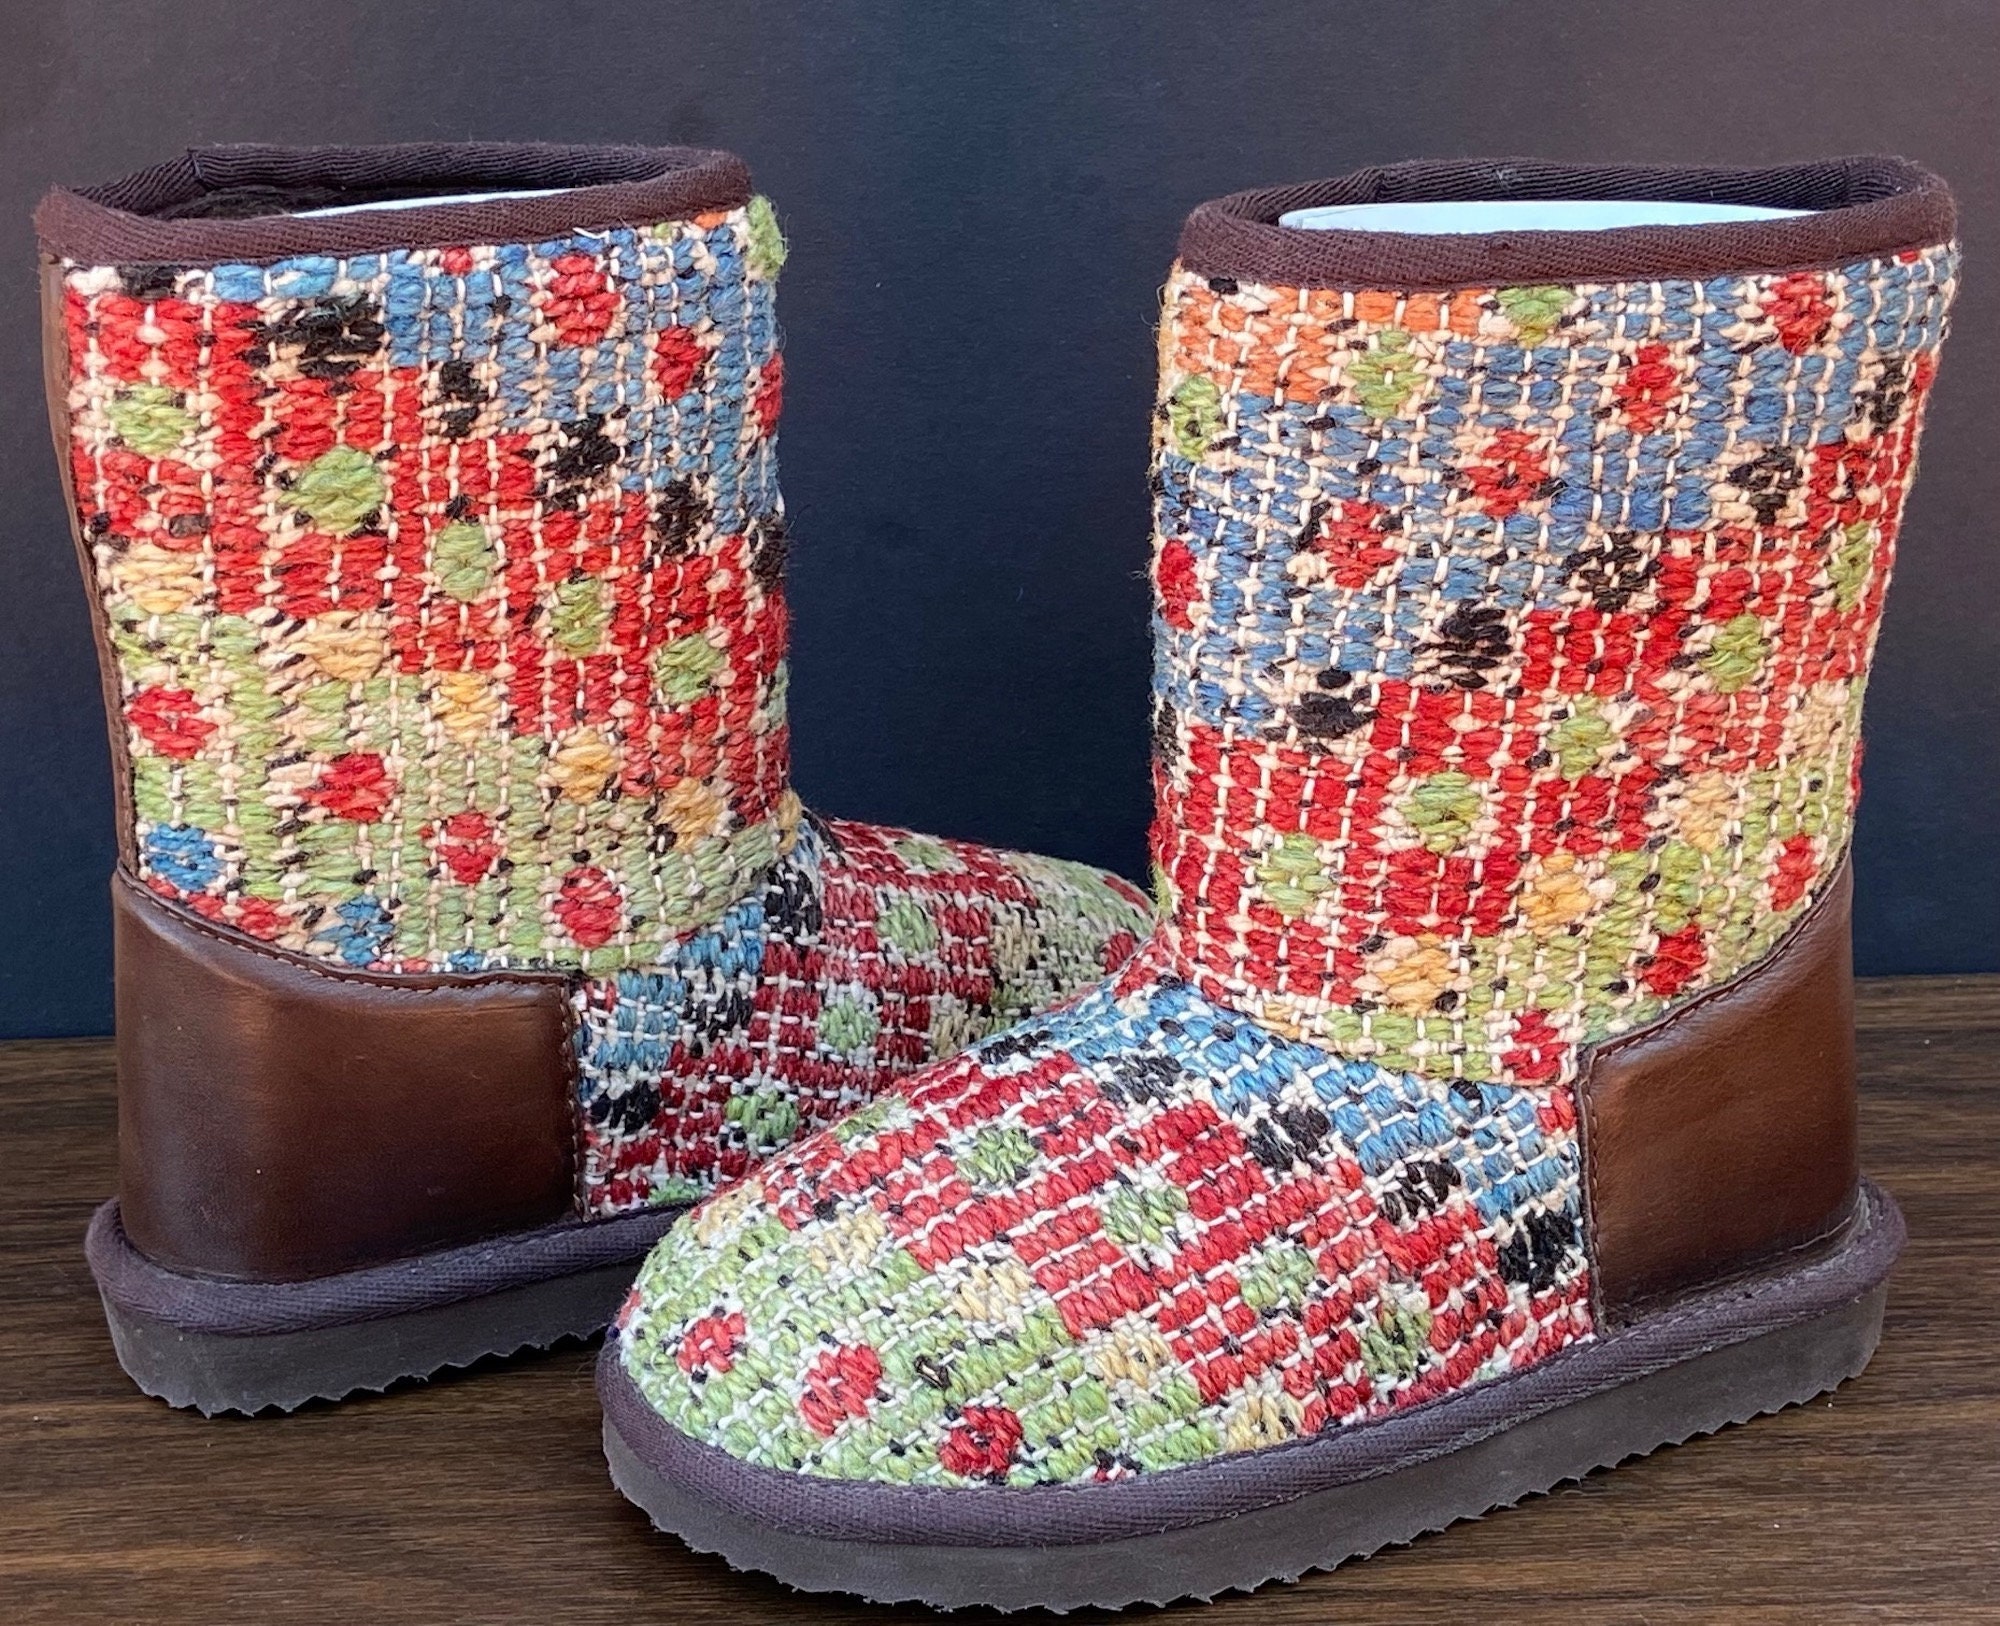 Size 3M Youth Never Worn Rubber Soles Fleece Lining Kilim and Leather Children's Boots